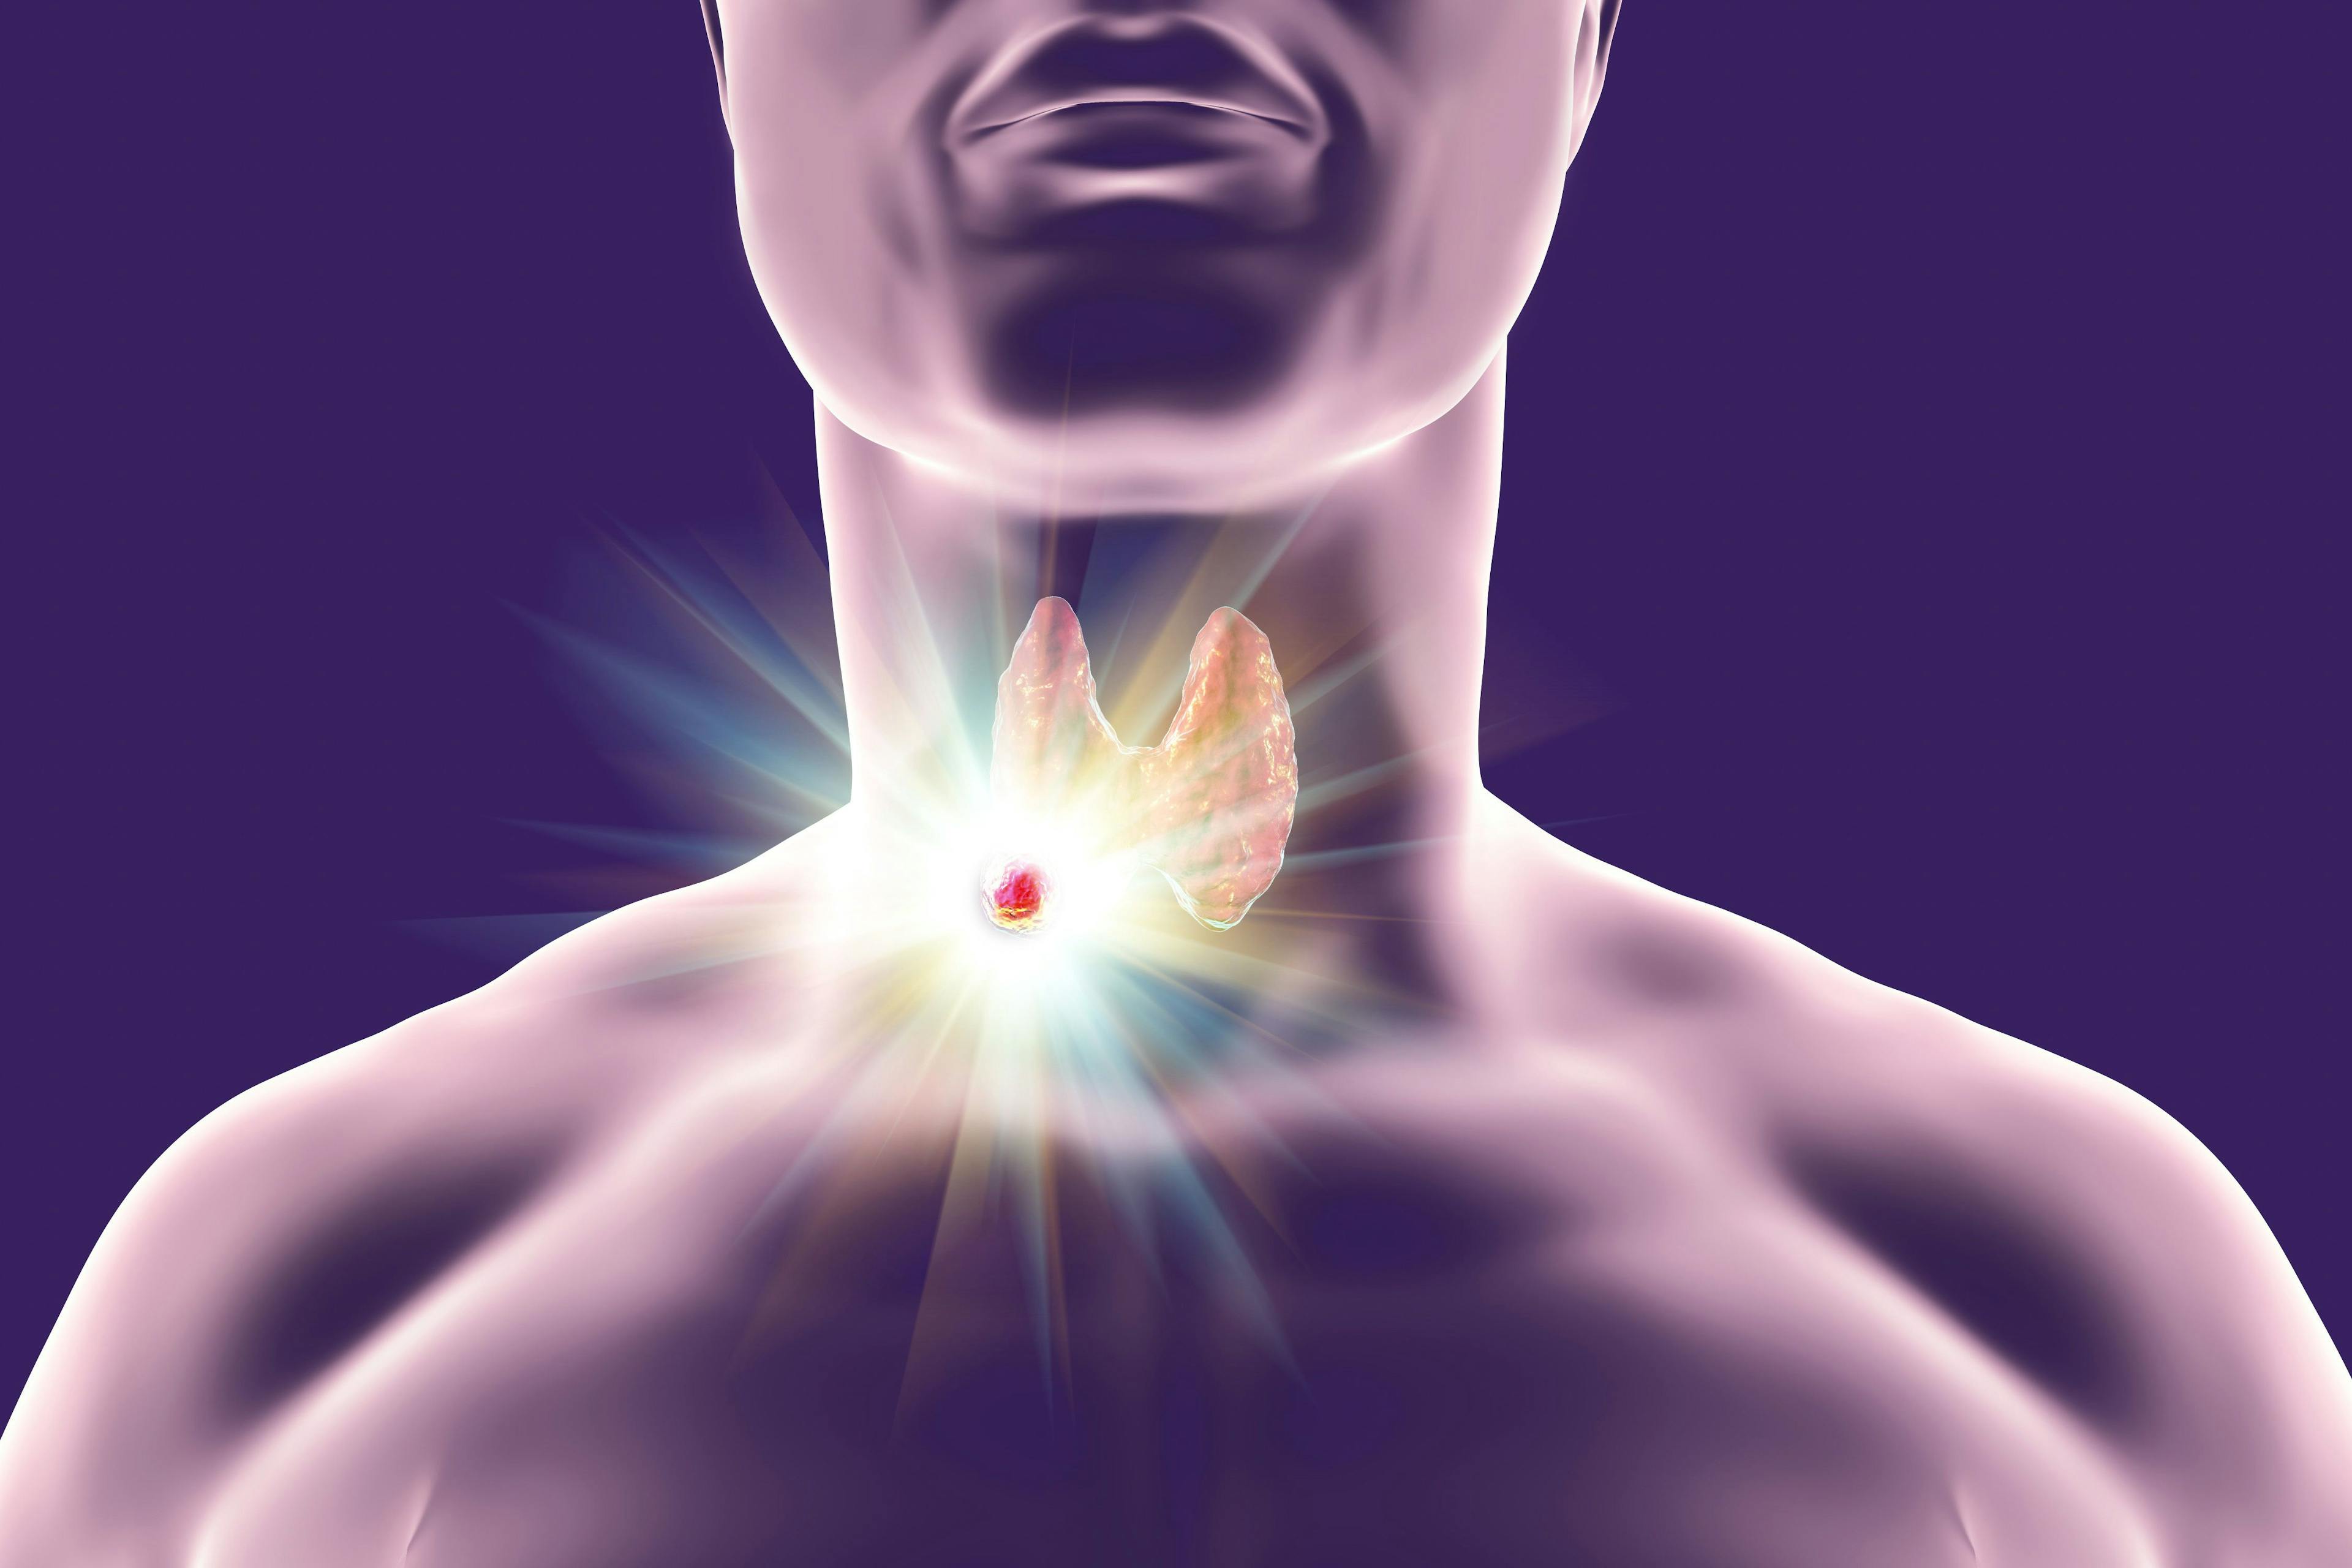 Tafinlar Plus Mekinist May Safely Improve Long-Term Survival in Patients with Rare Thyroid Cancer